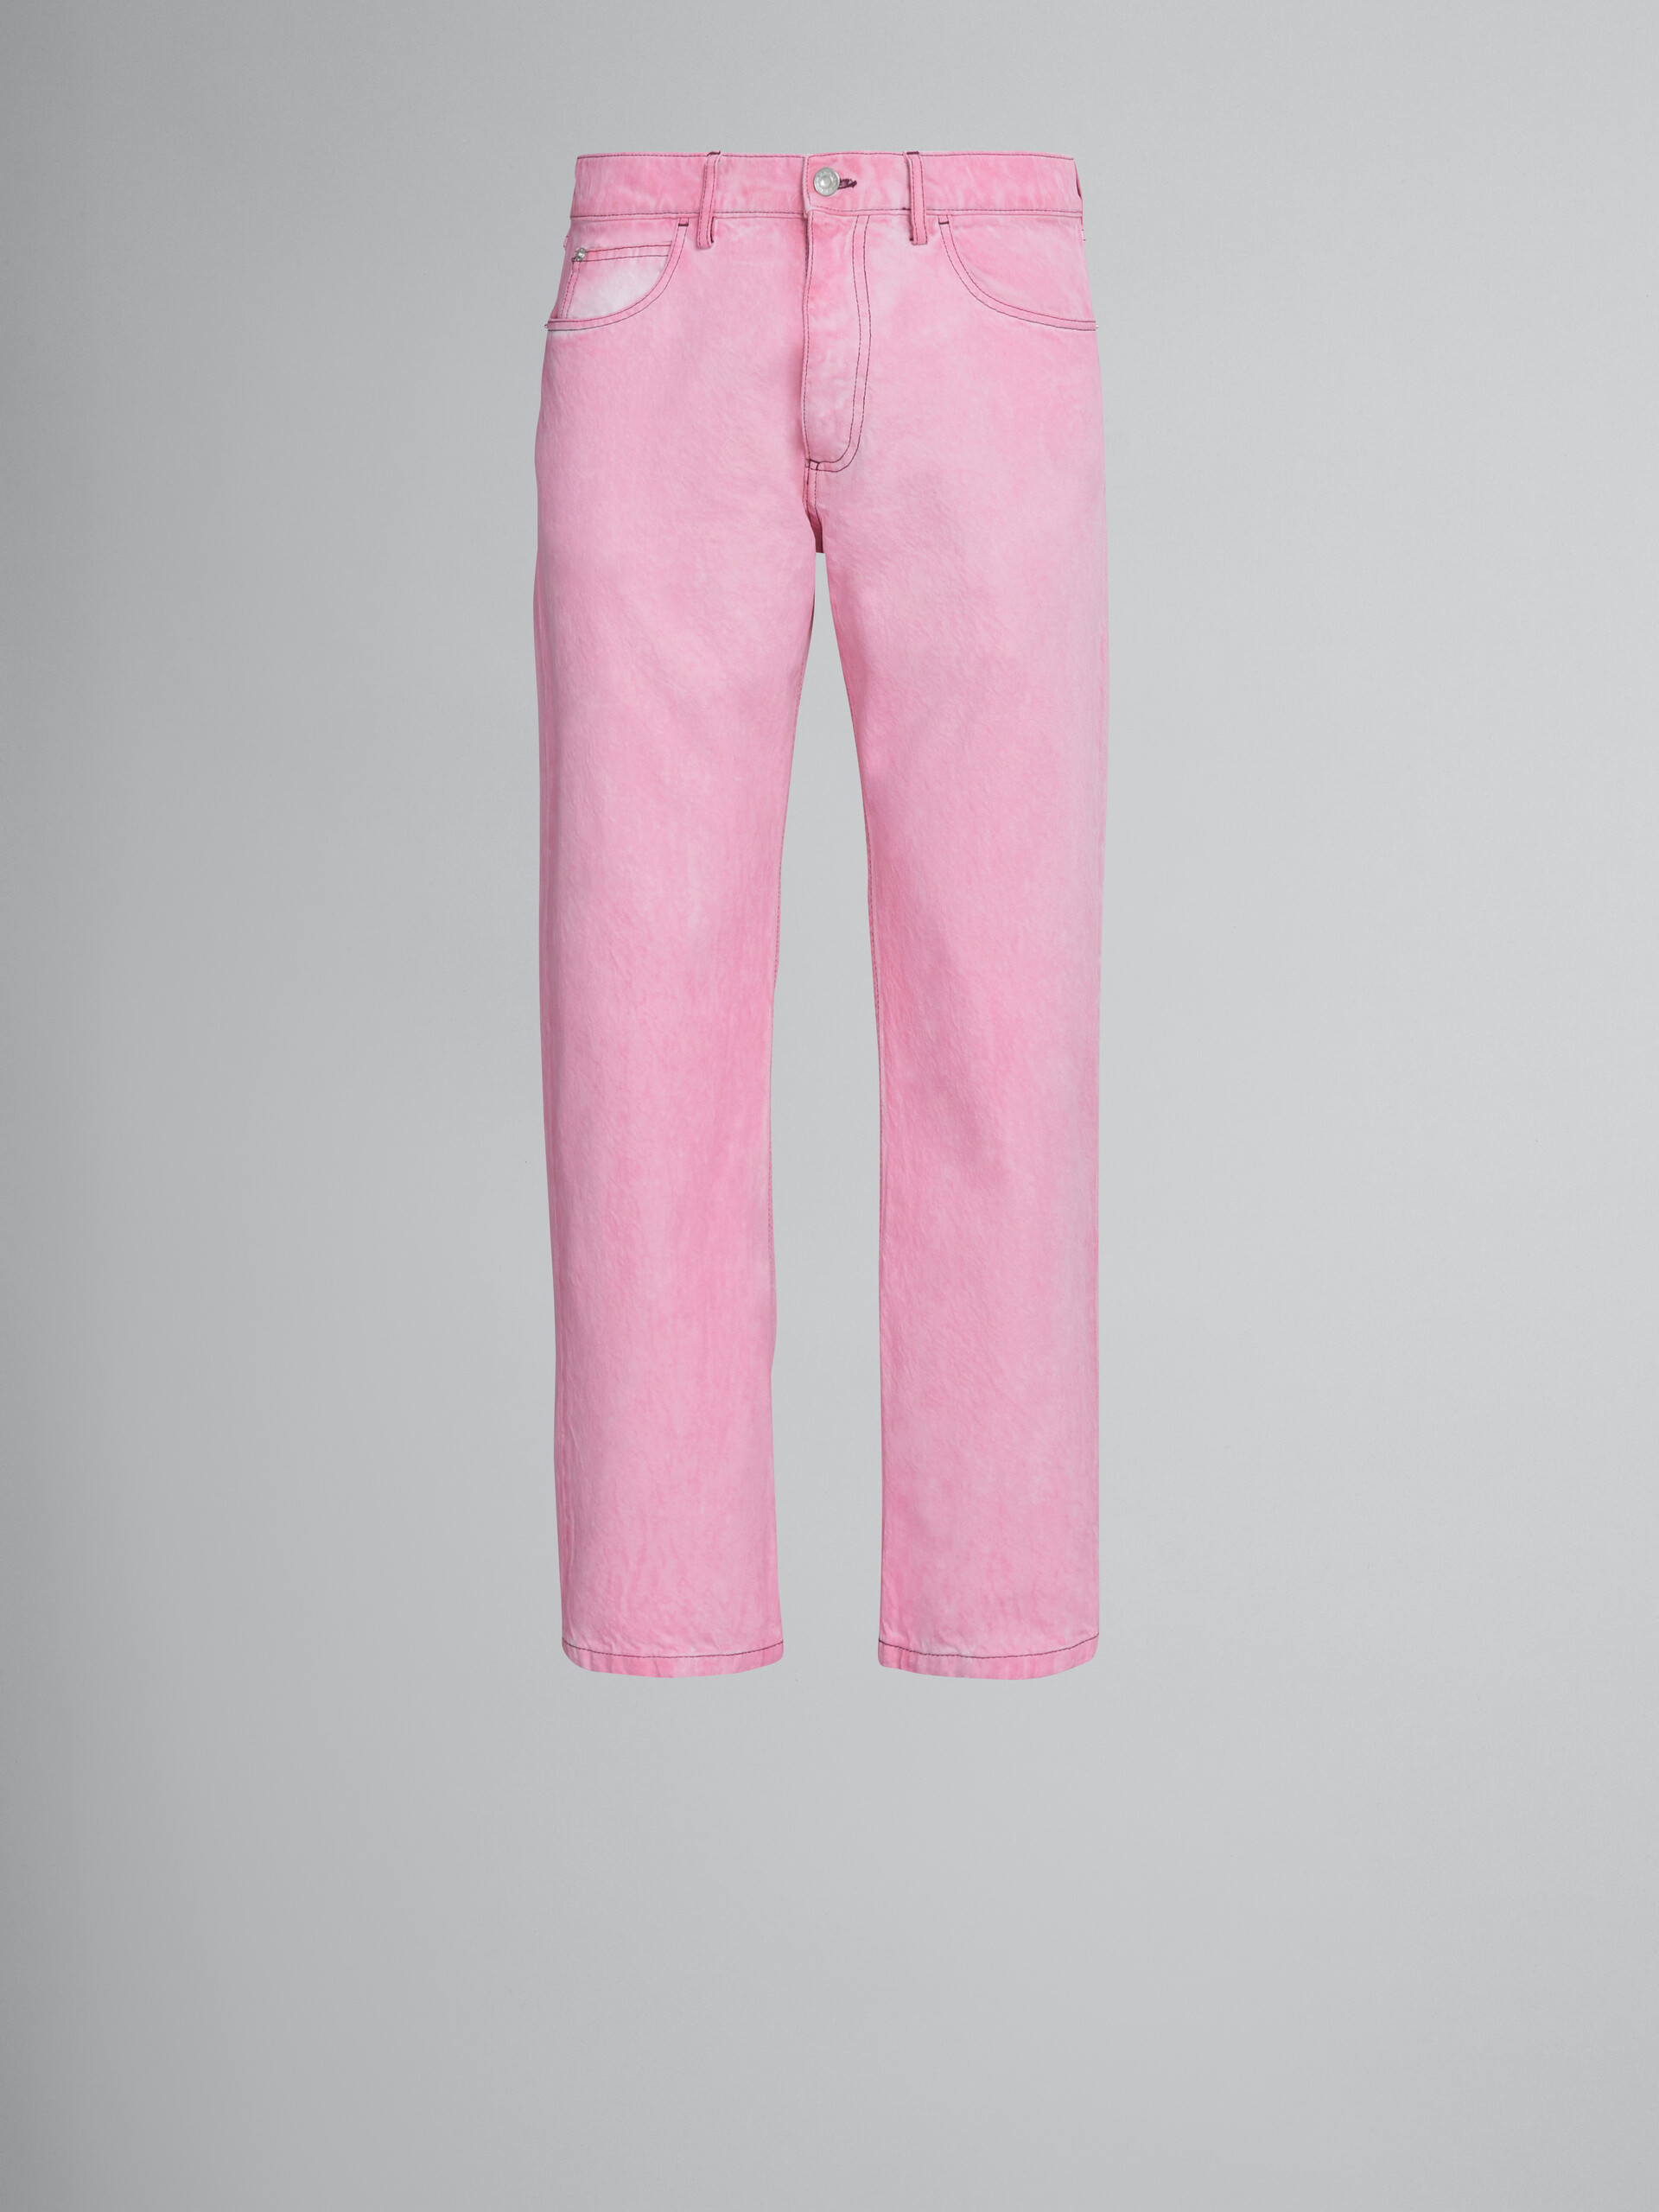 Straight trousers in pink cotton drill - Pants - Image 1